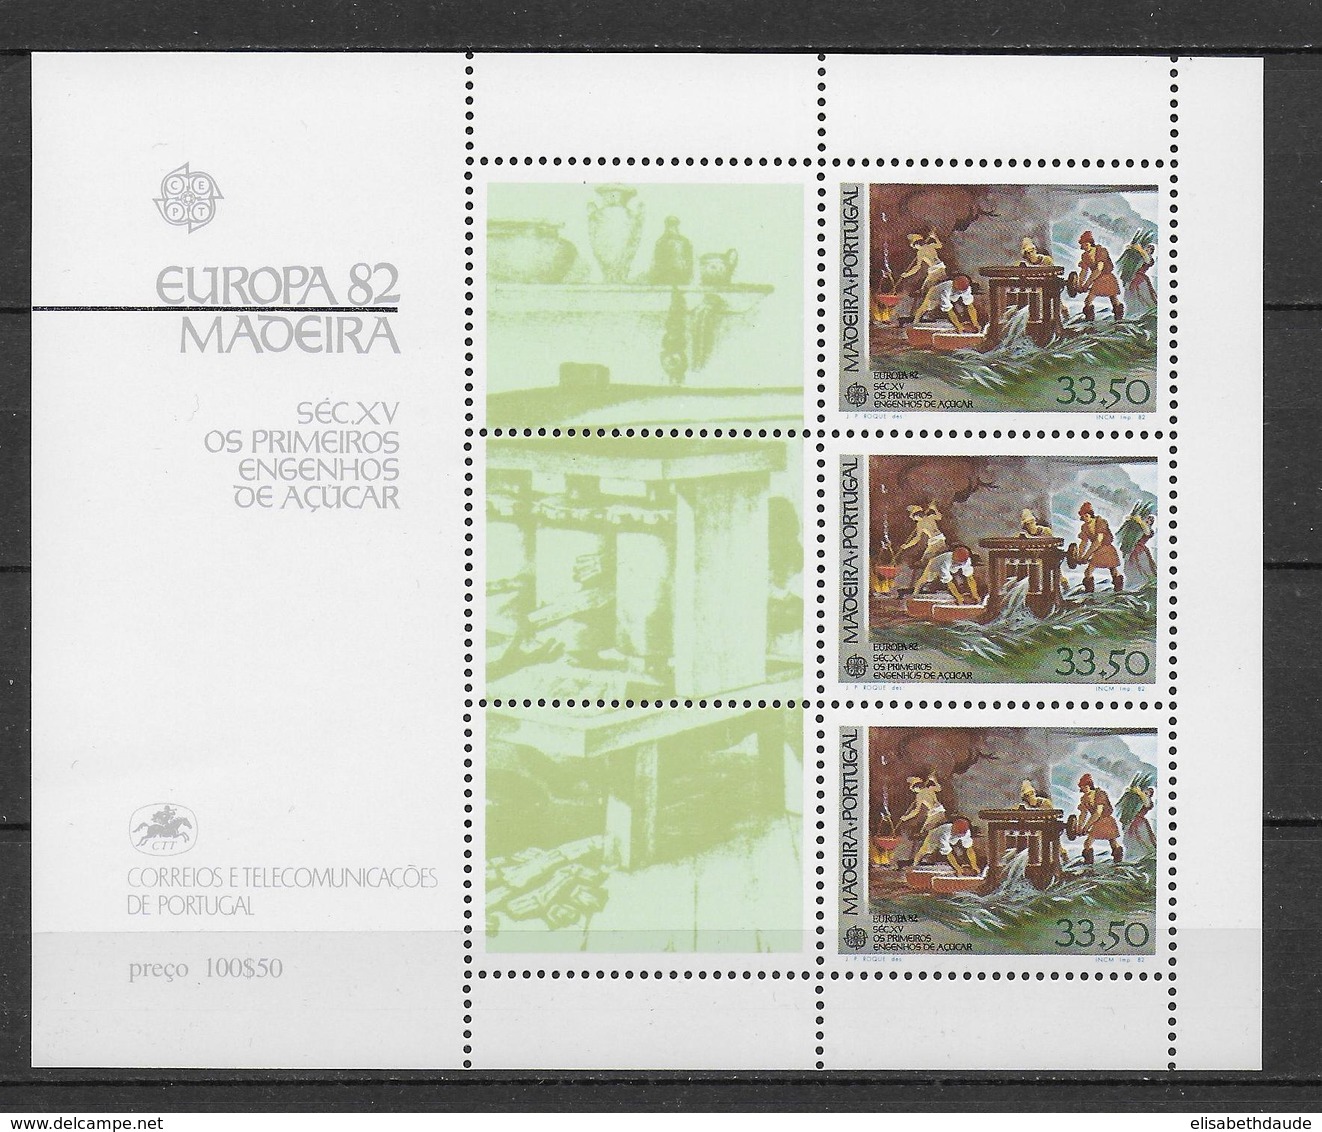 PORTUGAL / MADEIRA - EUROPA  1982 - BLOC N° 3 ** MNH - HISTOIRE - Madère